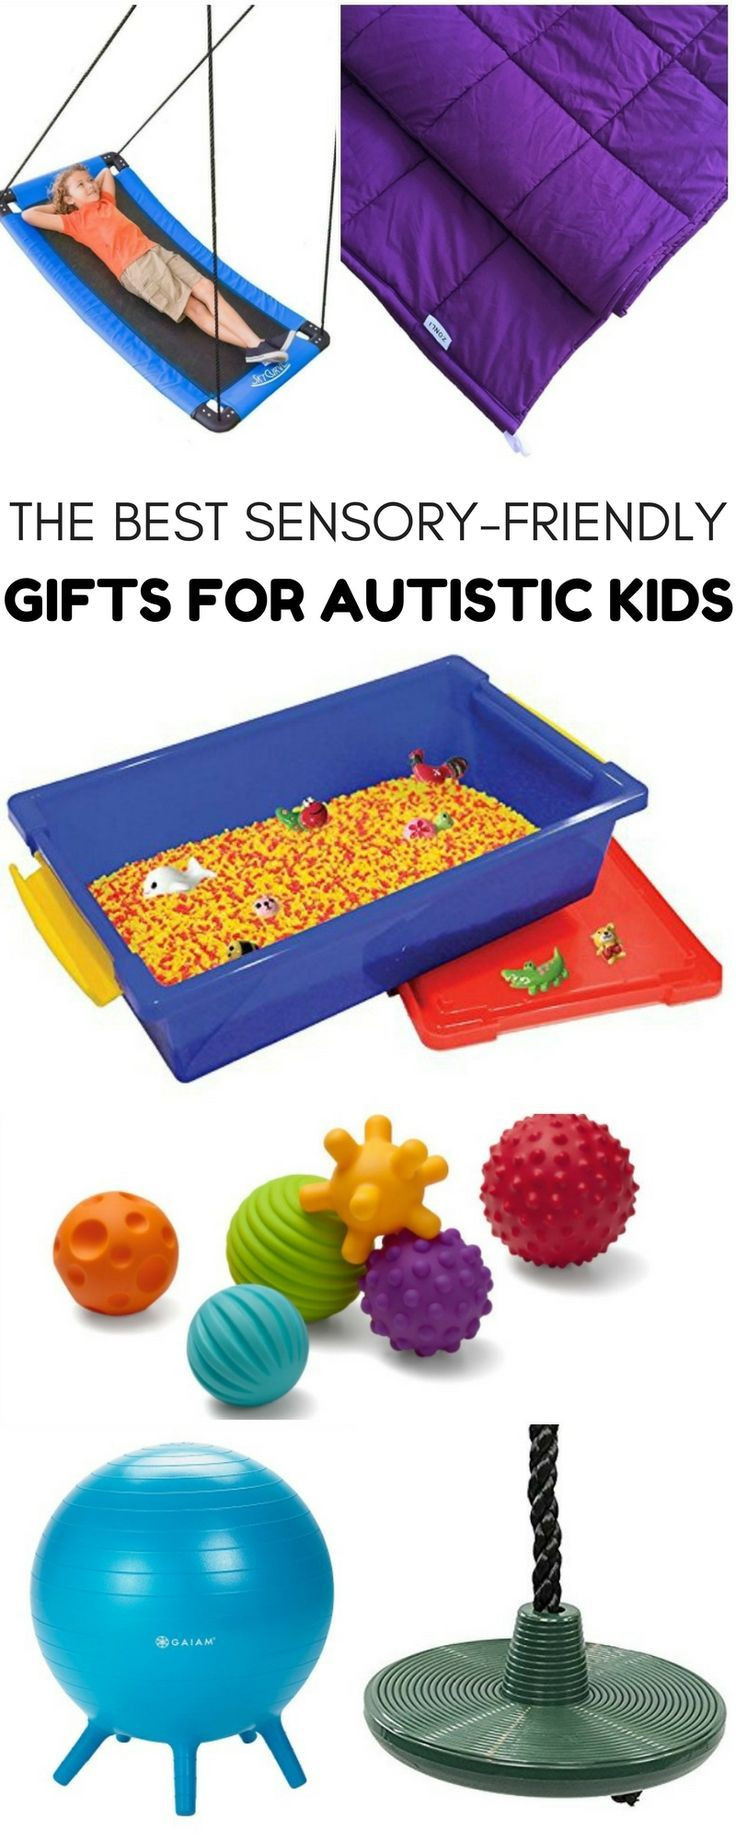 Gifts For Autistic Children
 The Best Sensory Friendly Gifts for Autistic Kids